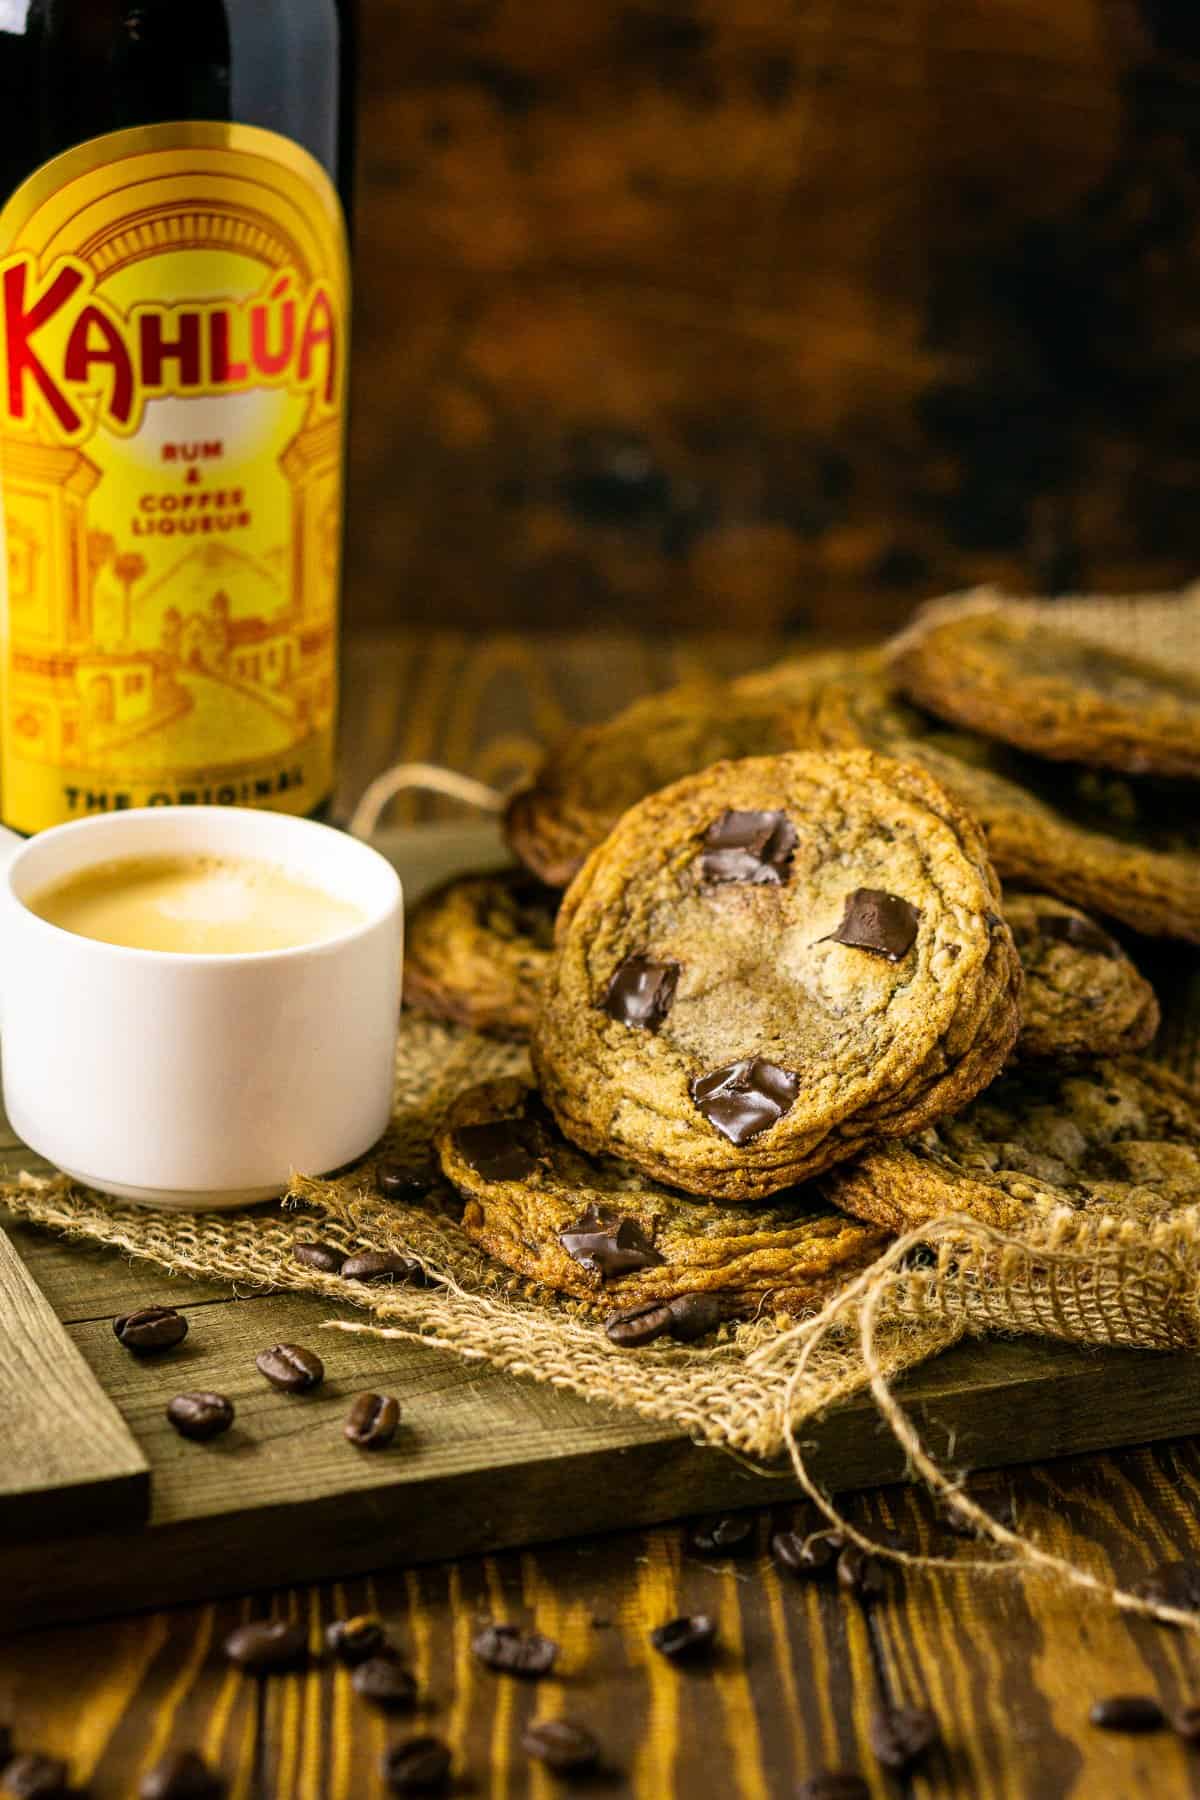 A pile of espresso and Kahlua cookies on a wooden tray with burlap and a cup of espresso and bottle of Kahlua next to it.